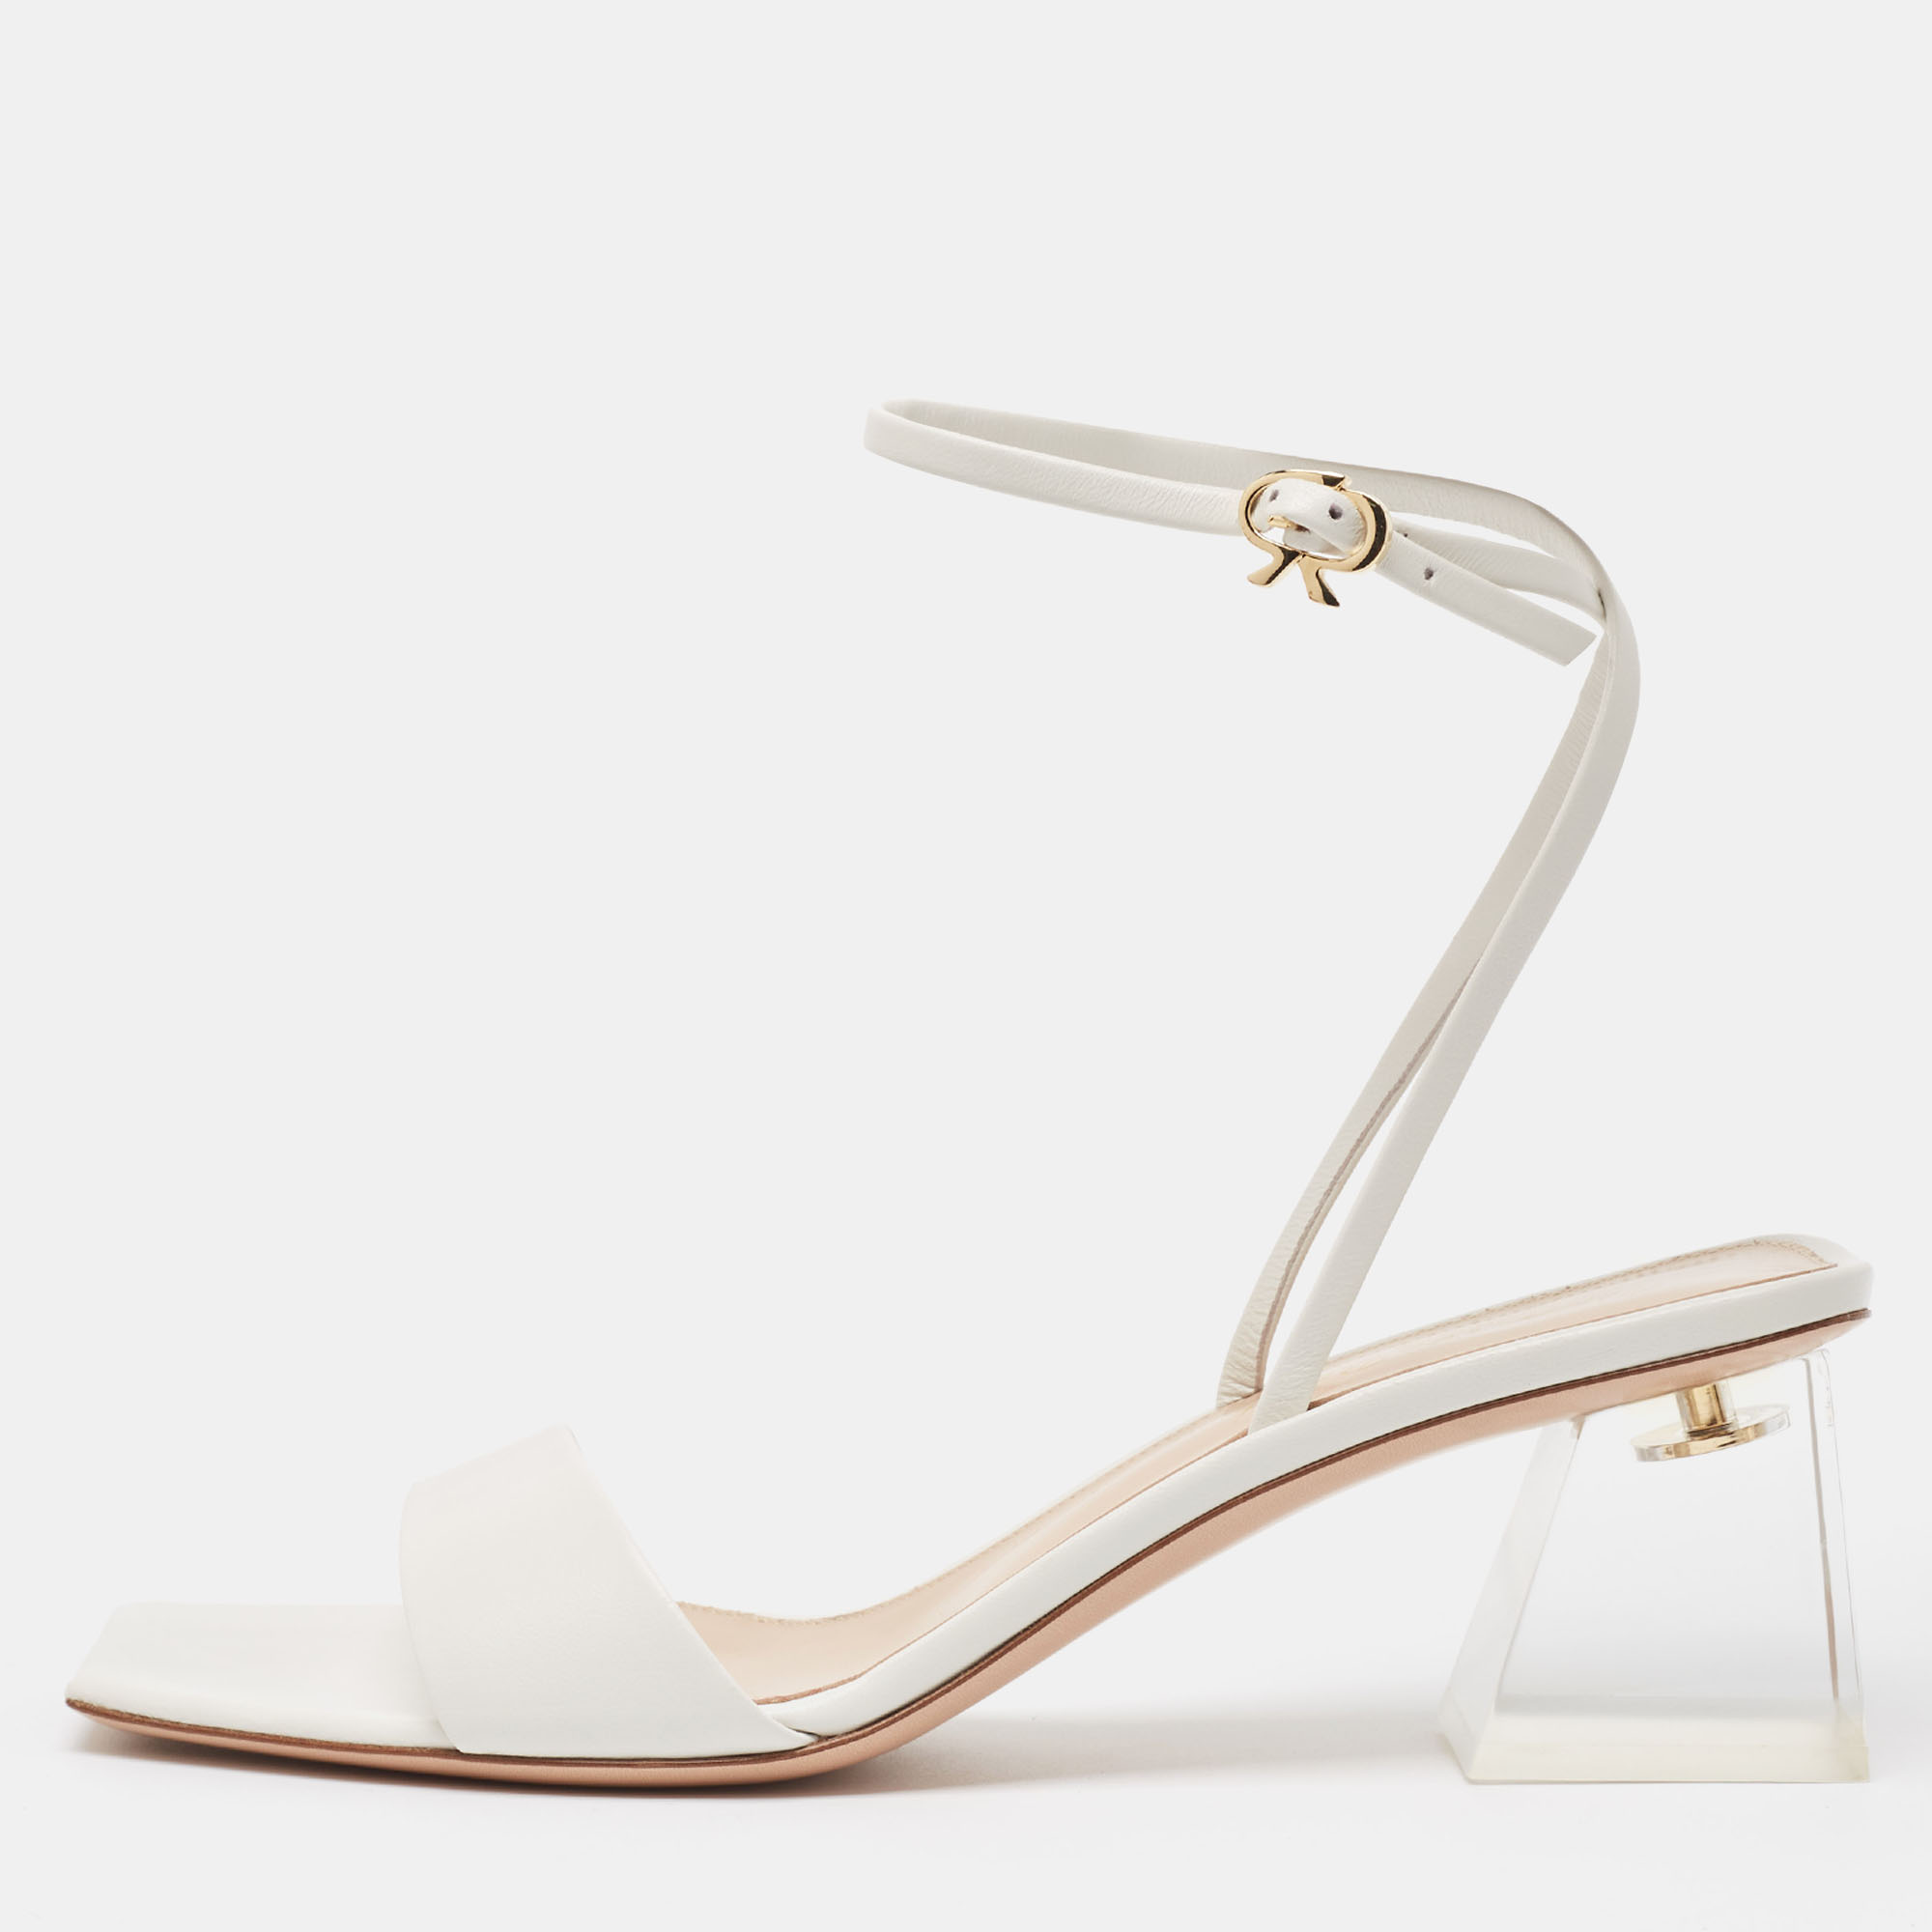 Gianvito rossi white leather cosmic sandals size 39